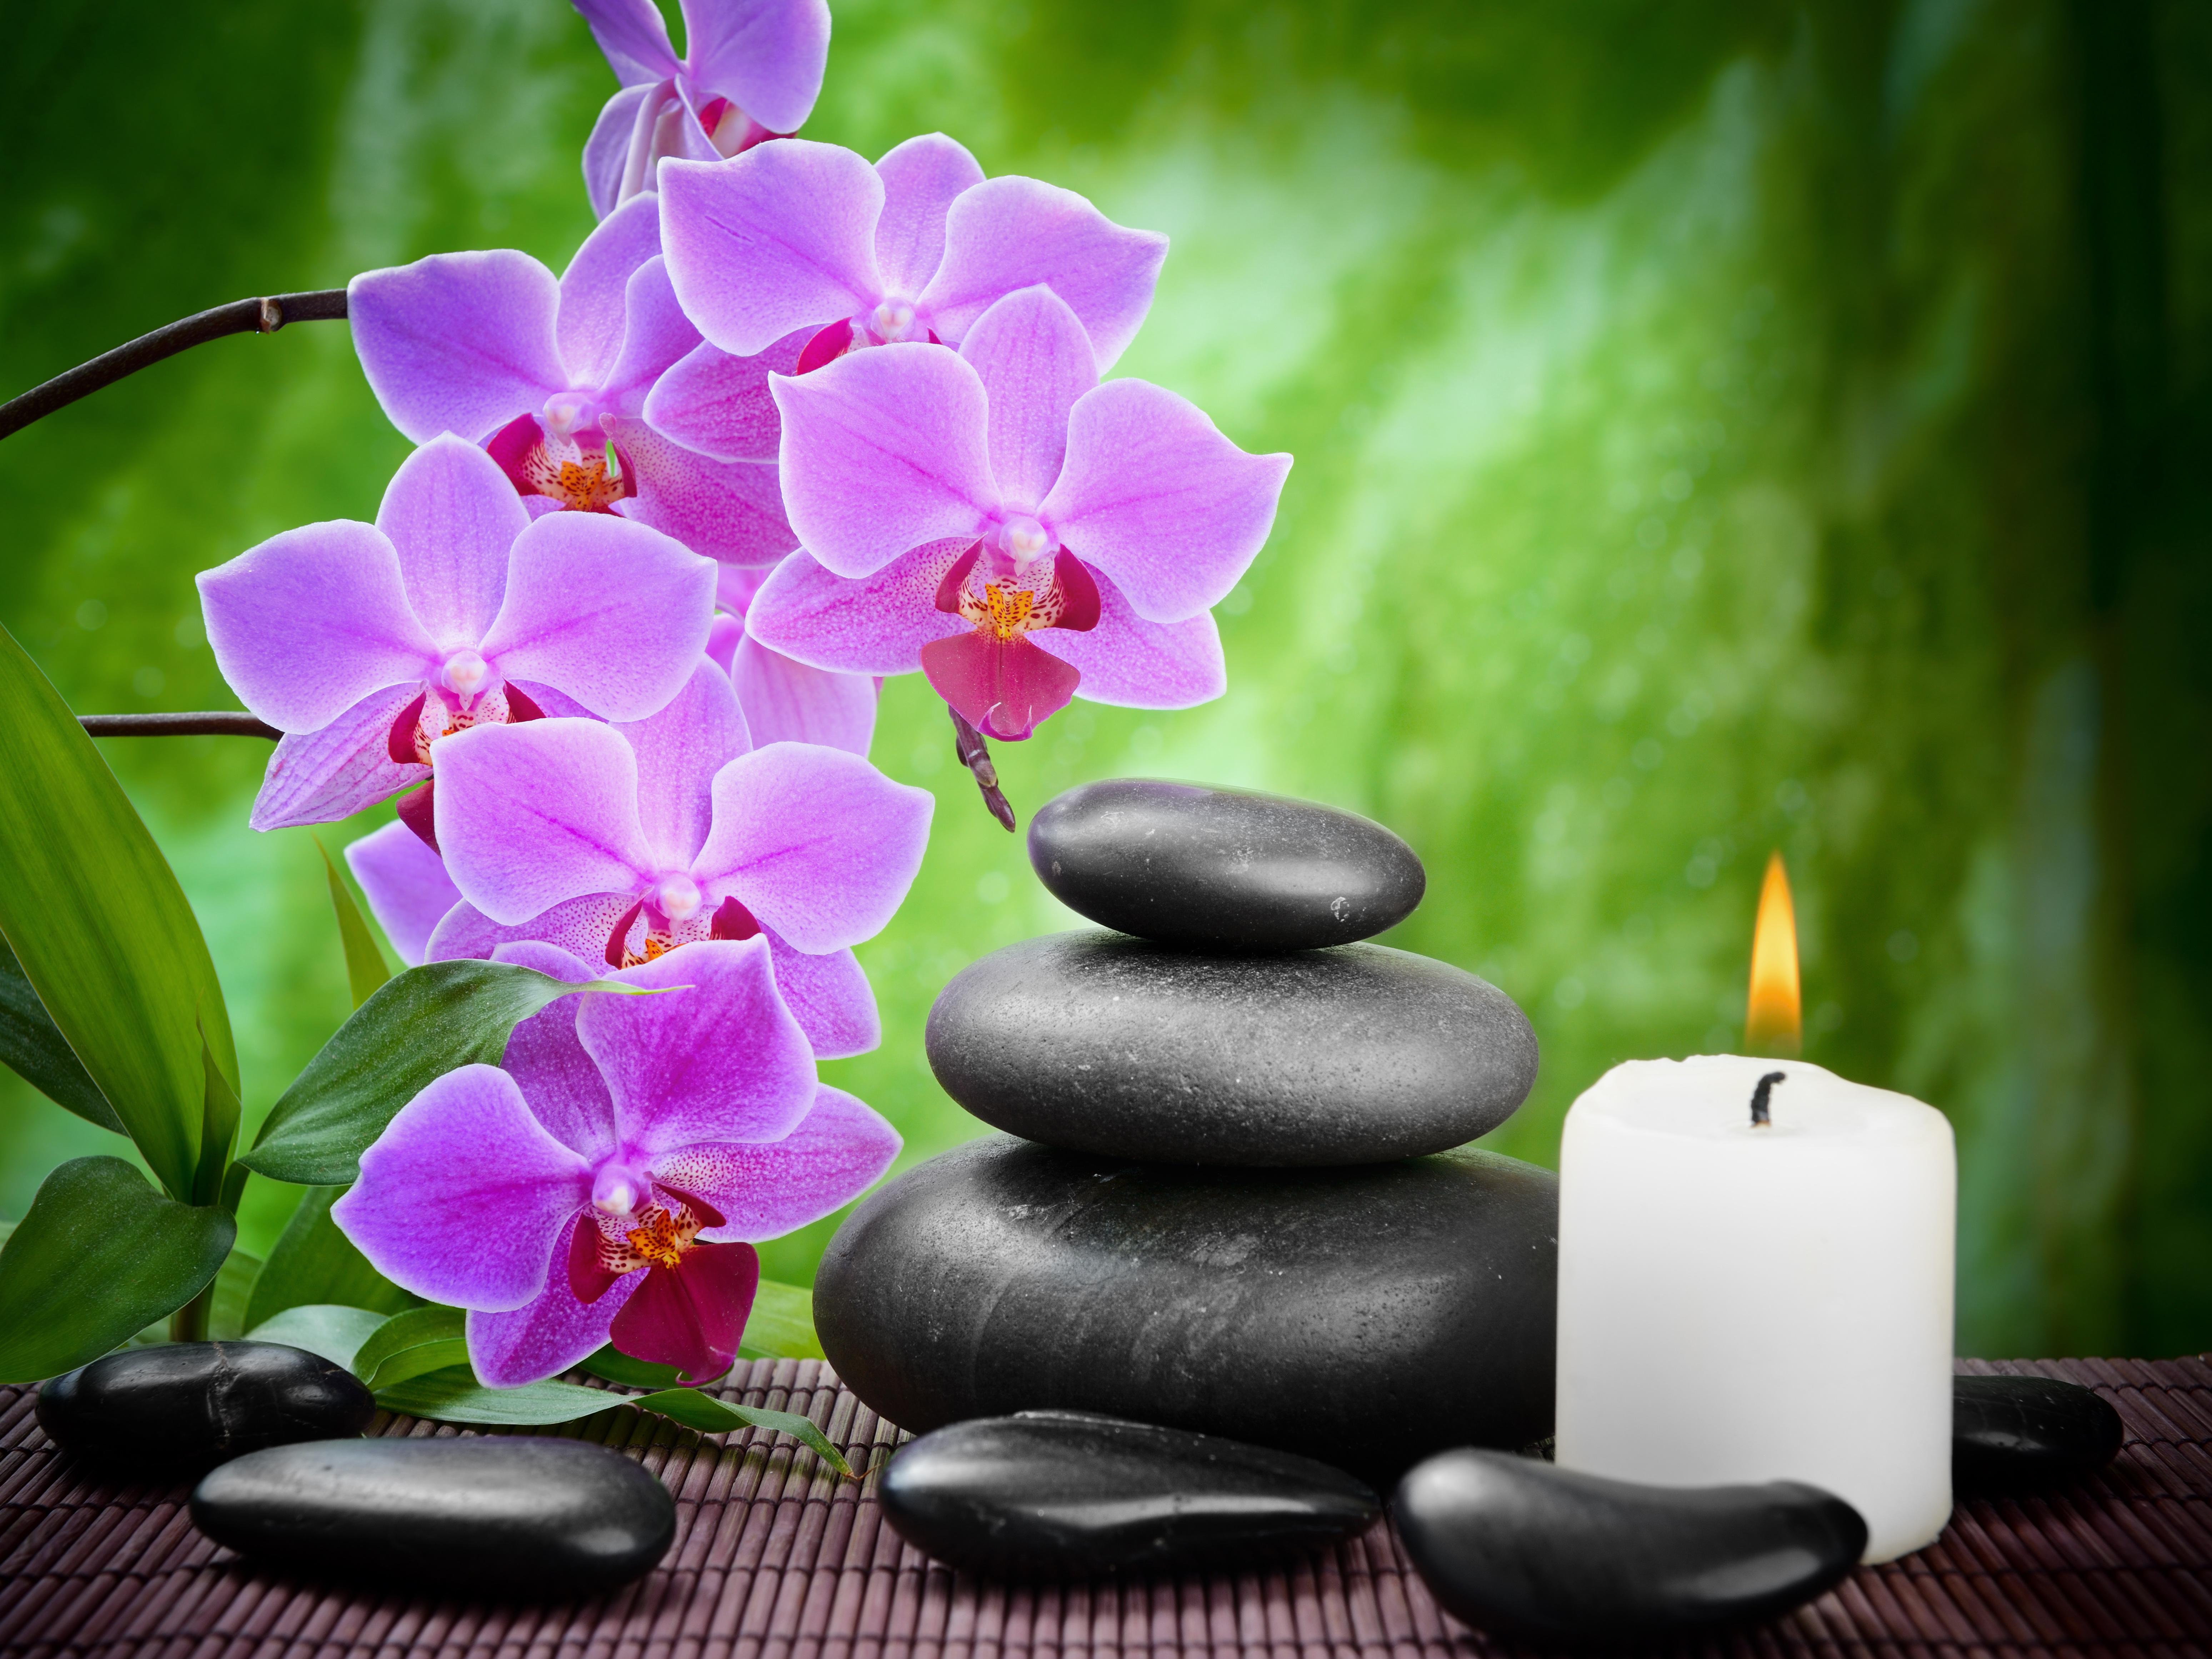 Green Spa Background with Orchids